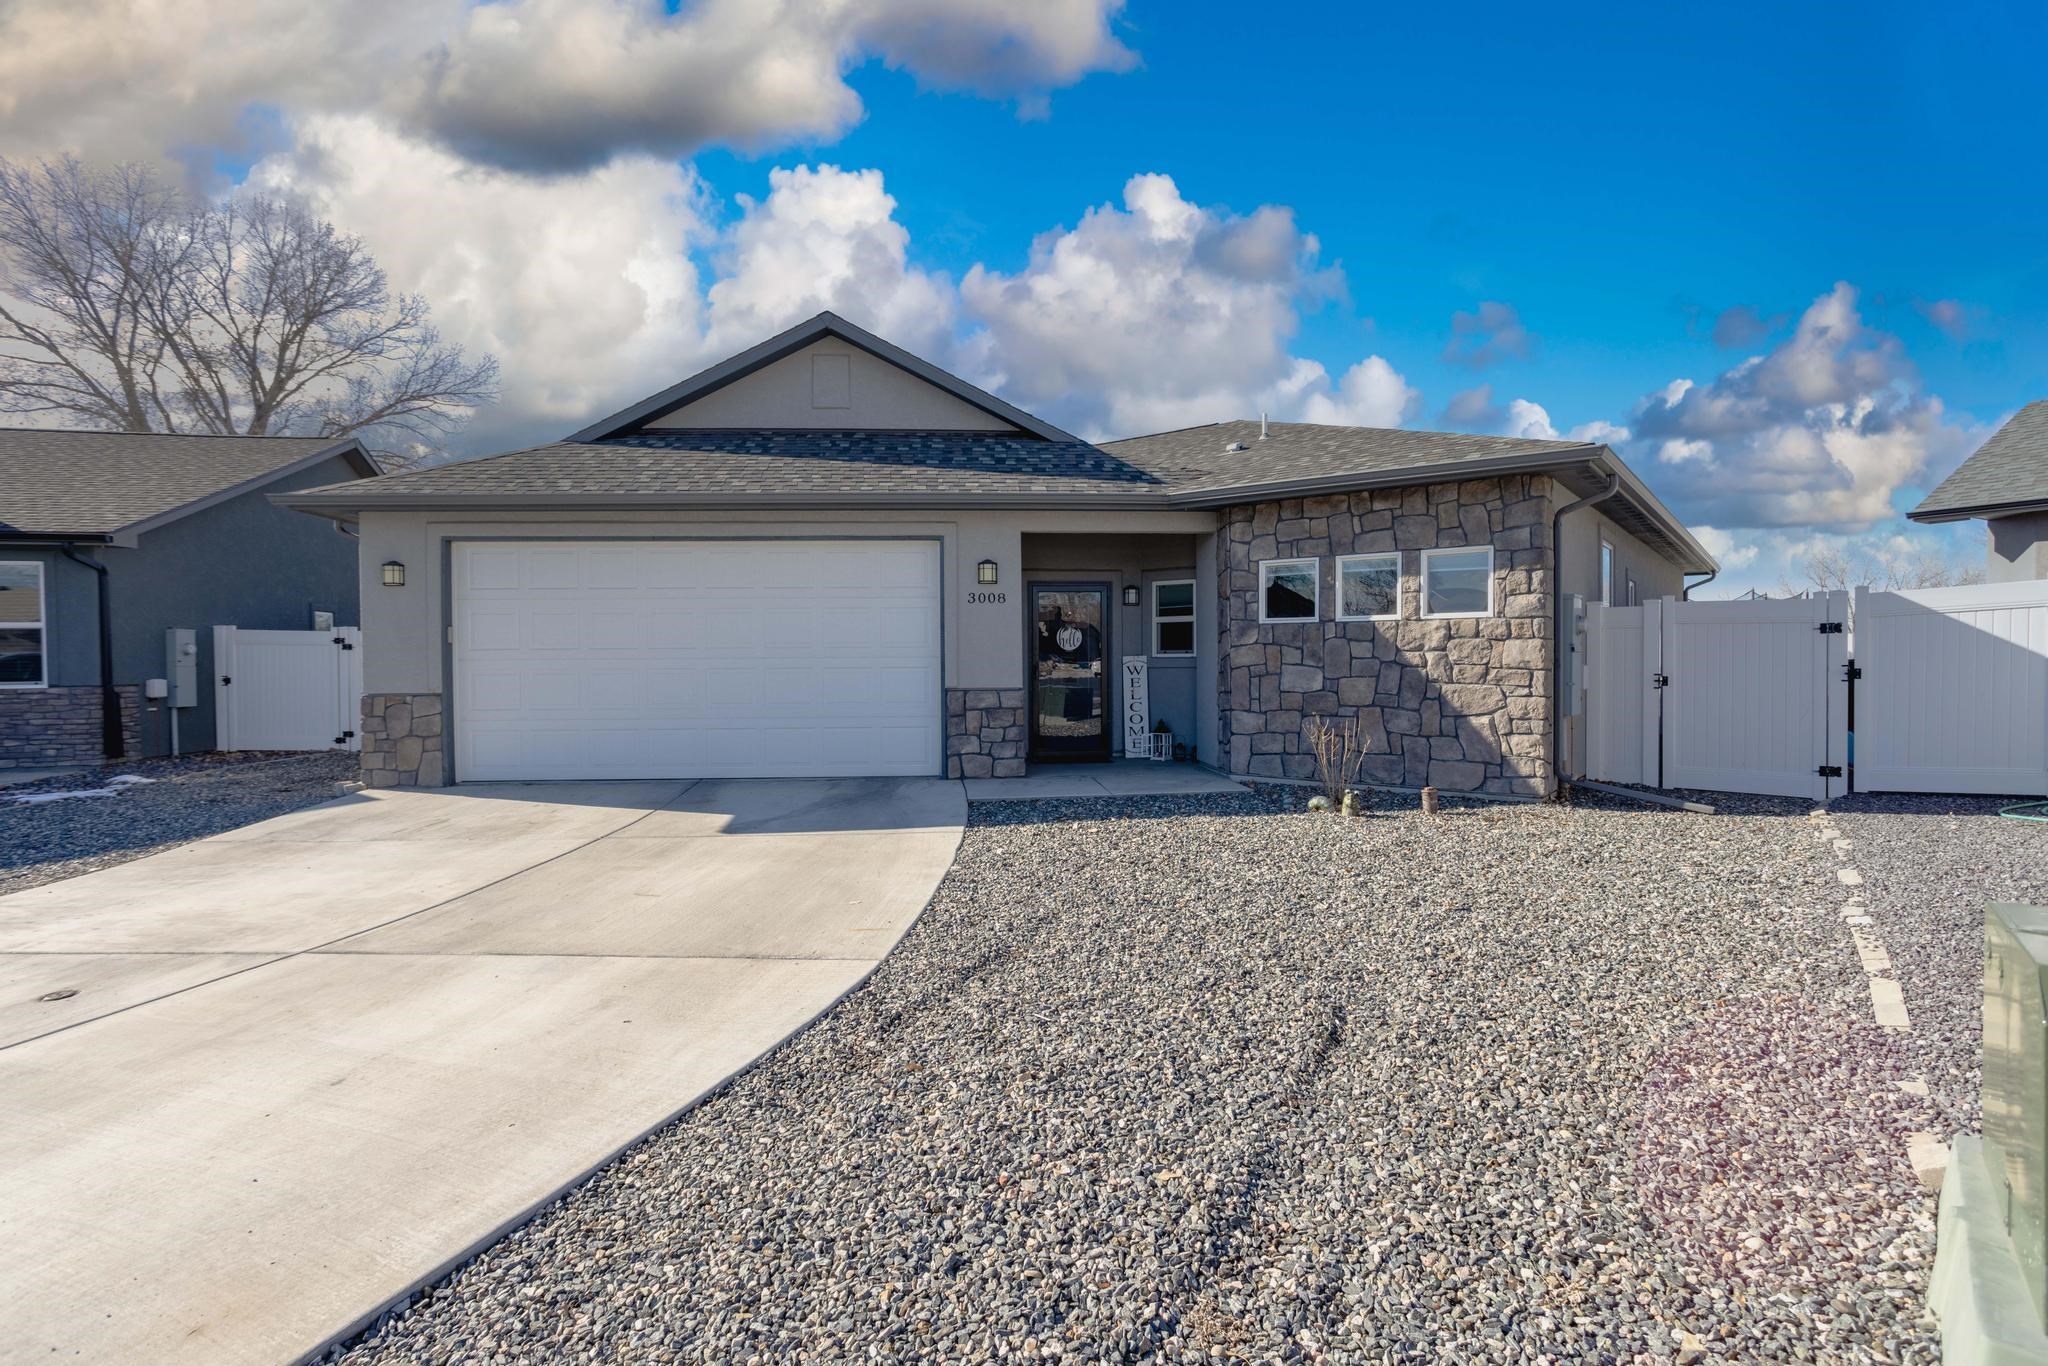 OPEN HOUSE WILL BE HELD ON SATURDAY 1/22/2022 FROM 10AM - 1PM  Come see this gorgeous, split floor plan, Allbuild Construction LLC home built in 2018! This home is located in the highly desired Apple Acres Subdivision. There is  something for everyone. From the soaker tub in the primary bathroom, to the large landscaped backyard, to the extended tandem bay 3 Car Garage. That extended tandem car bay would be perfect for a work out location, hobby space, or designated shop area. The ideas are endless! Once your inside this home those vaulted ceilings and the open concept make it feel large and spacious. Not to mention these finishes are just stunning. Don't let this one get away!